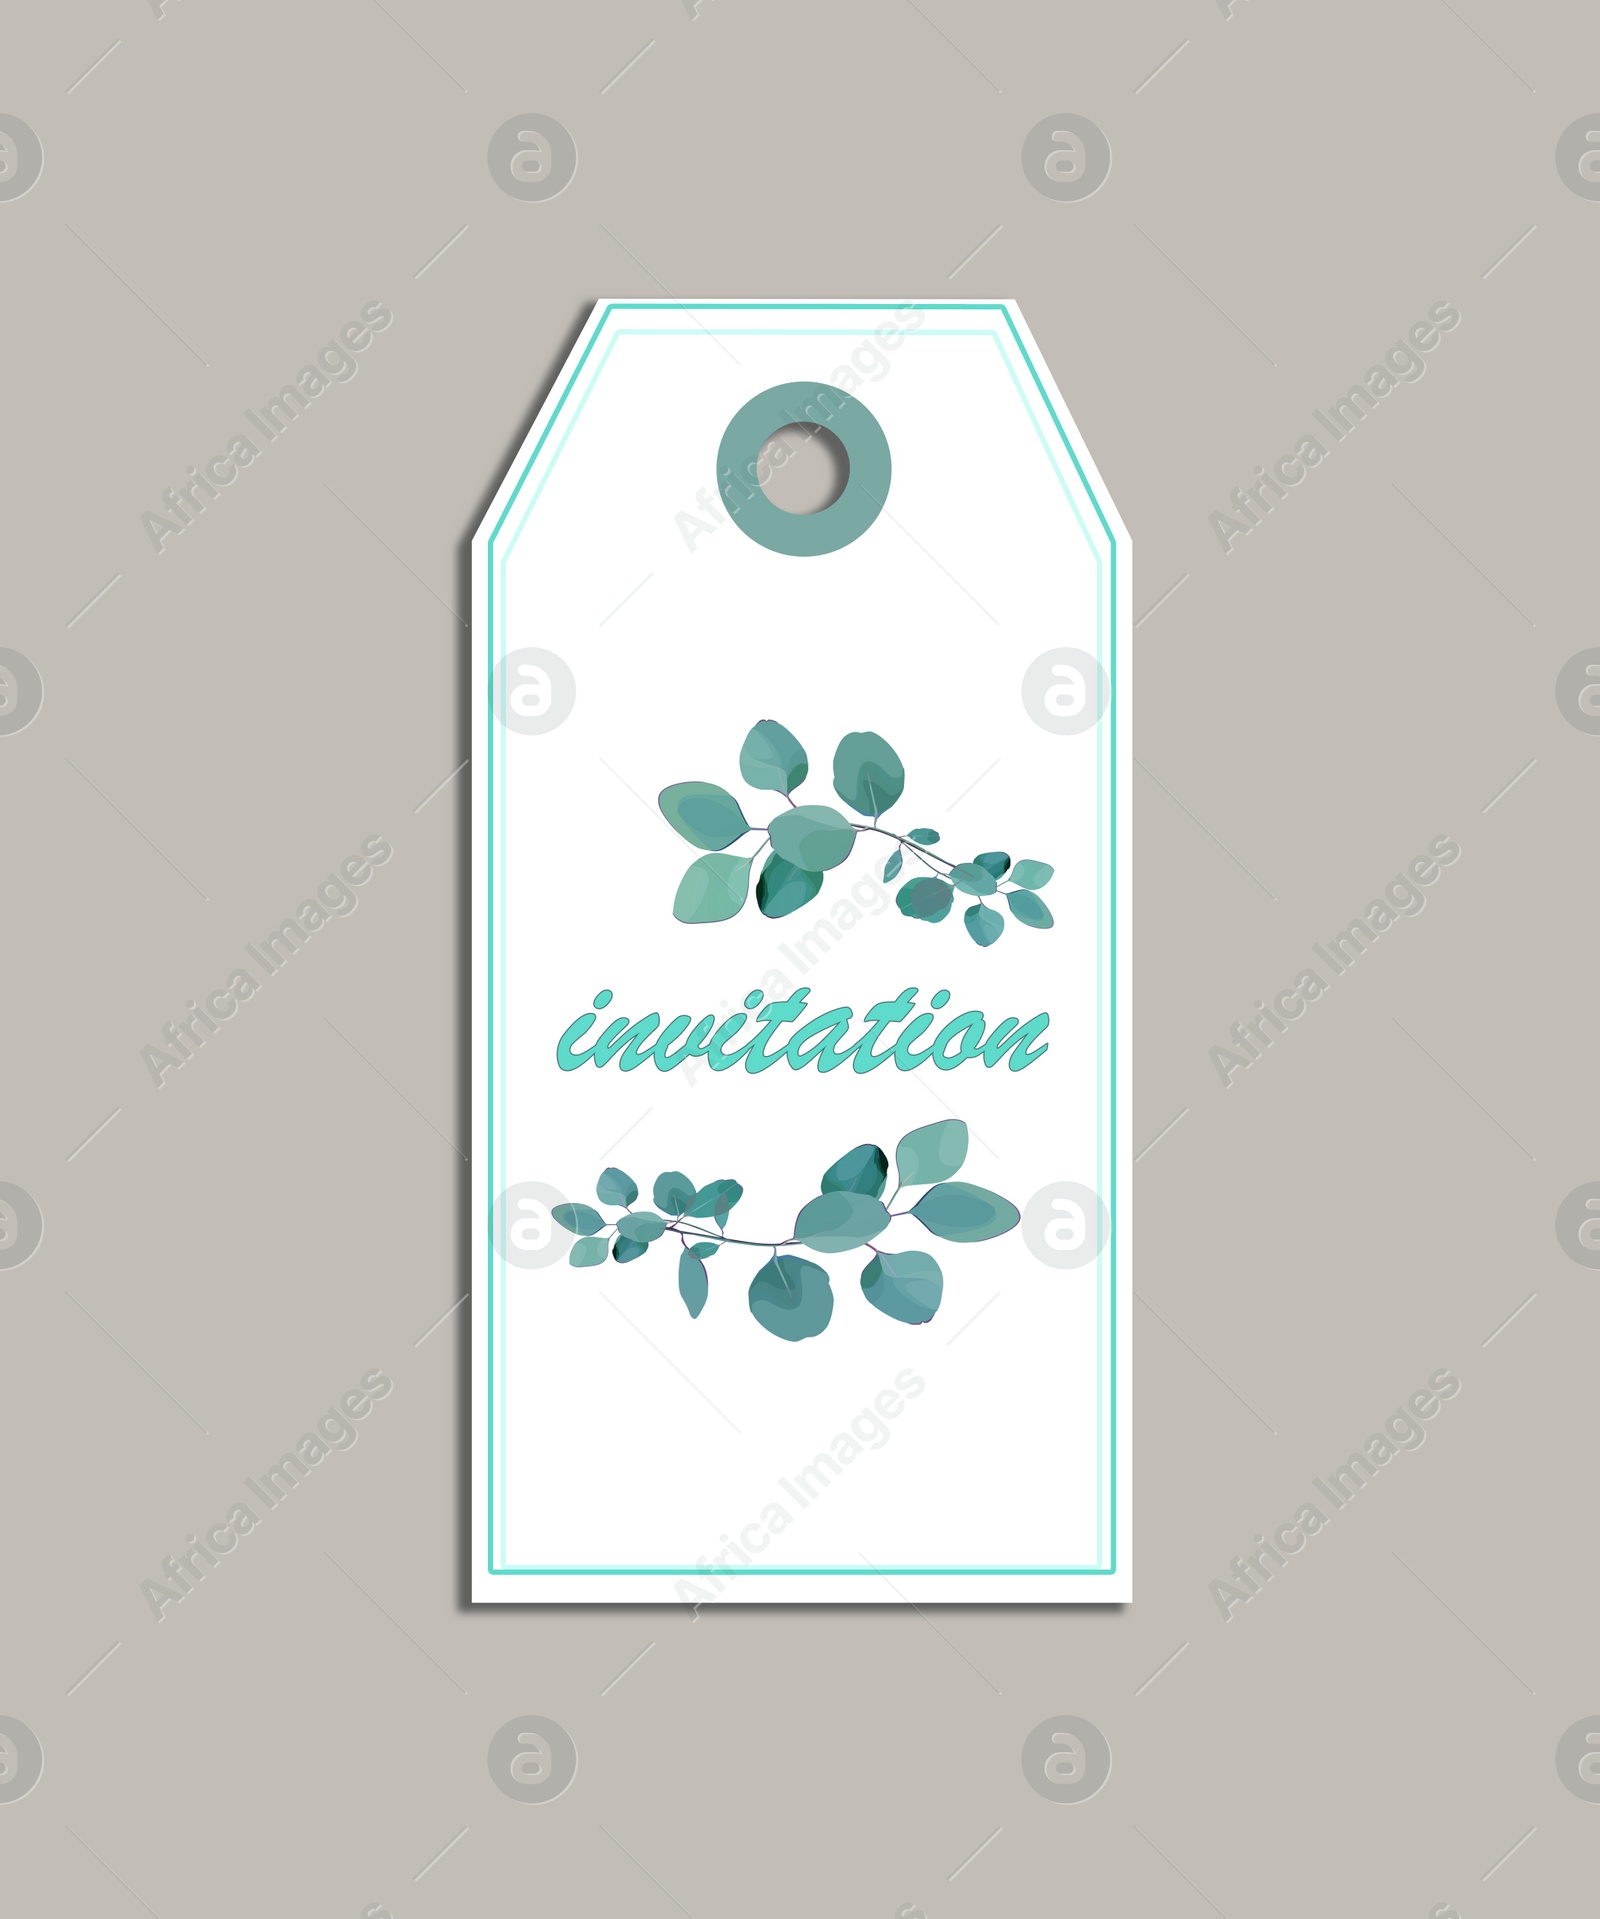 Illustration of Wedding invitation with floral design on grey background, top view